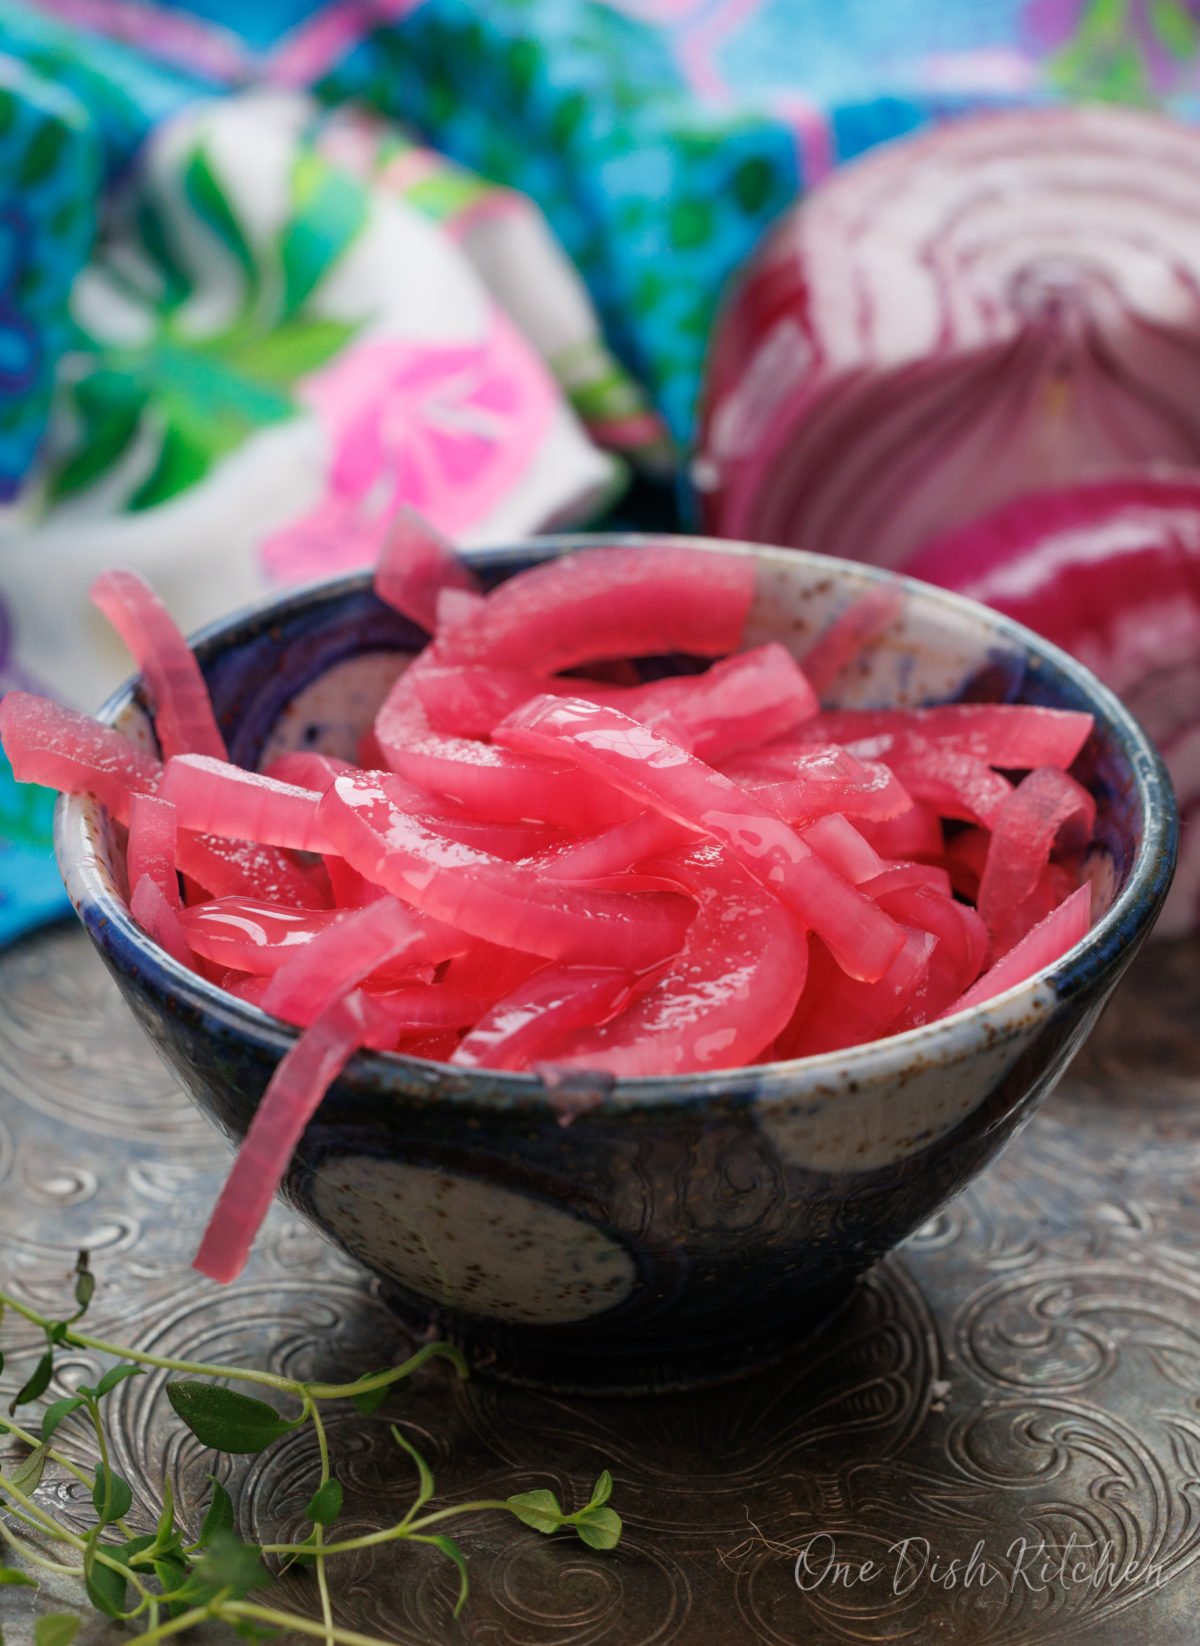 a small bowl filled with red pickled onions.